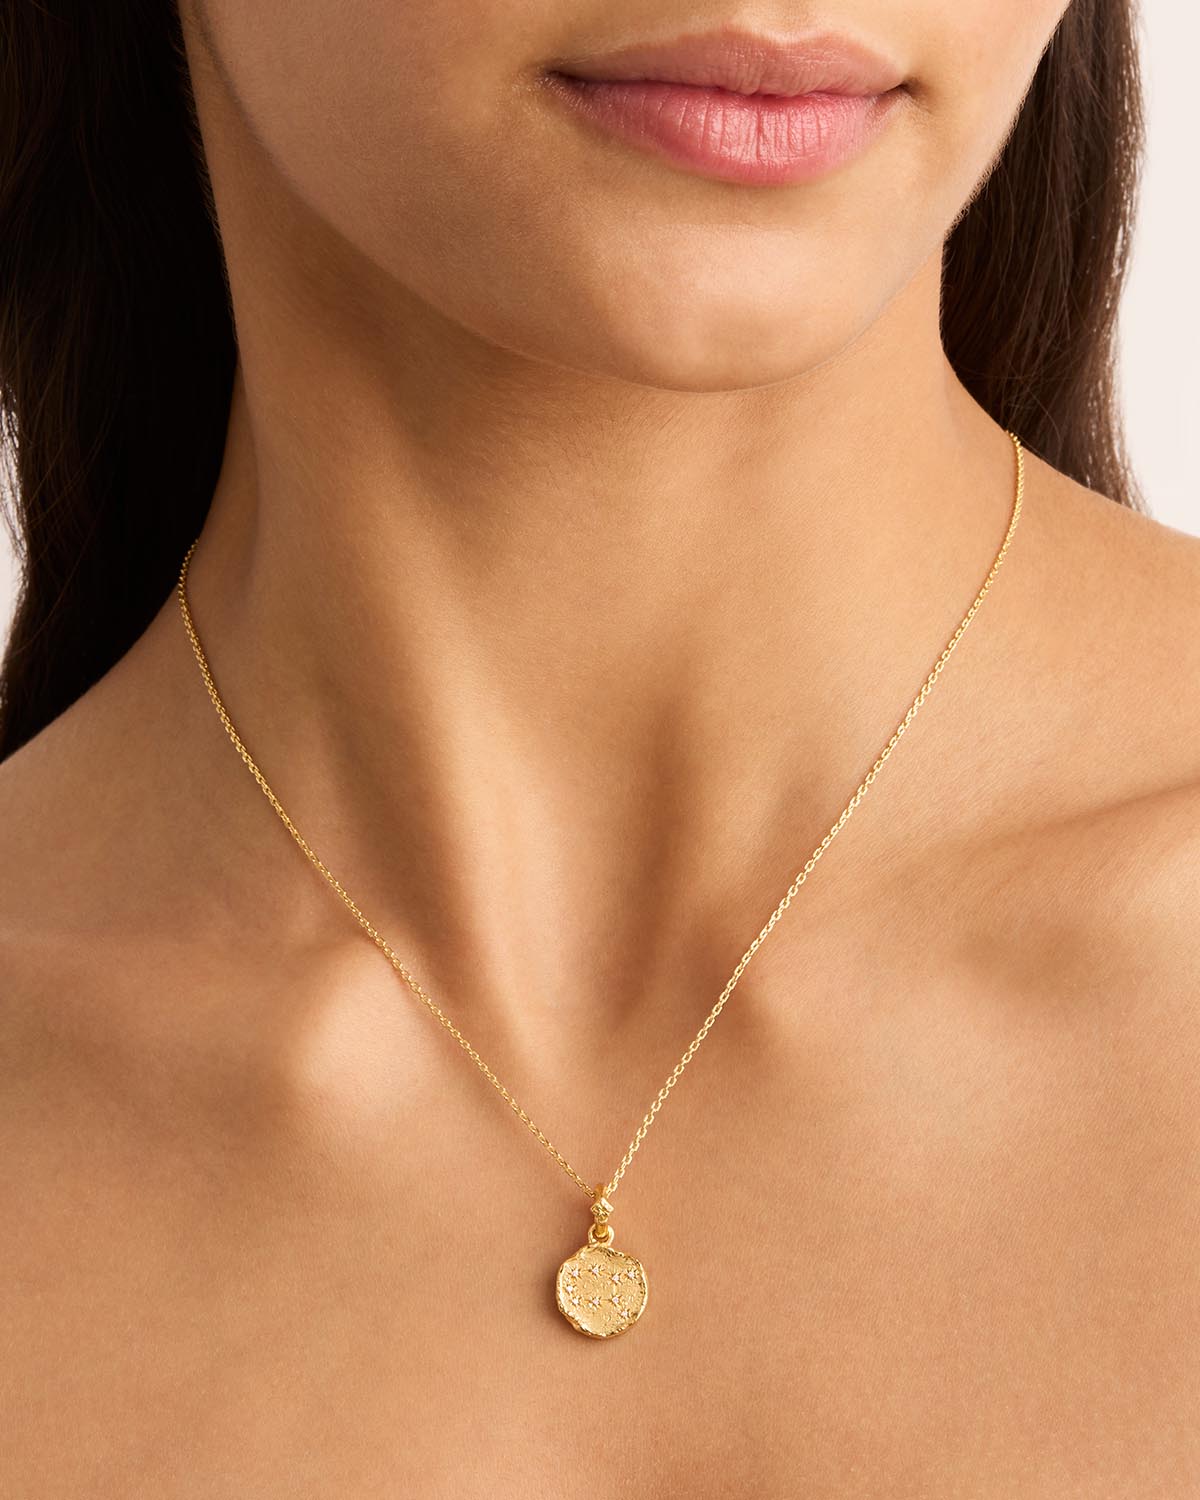 Diamond Accent Gemini Zodiac Disc Necklace in Sterling Silver with 14K Gold  Plate - 18